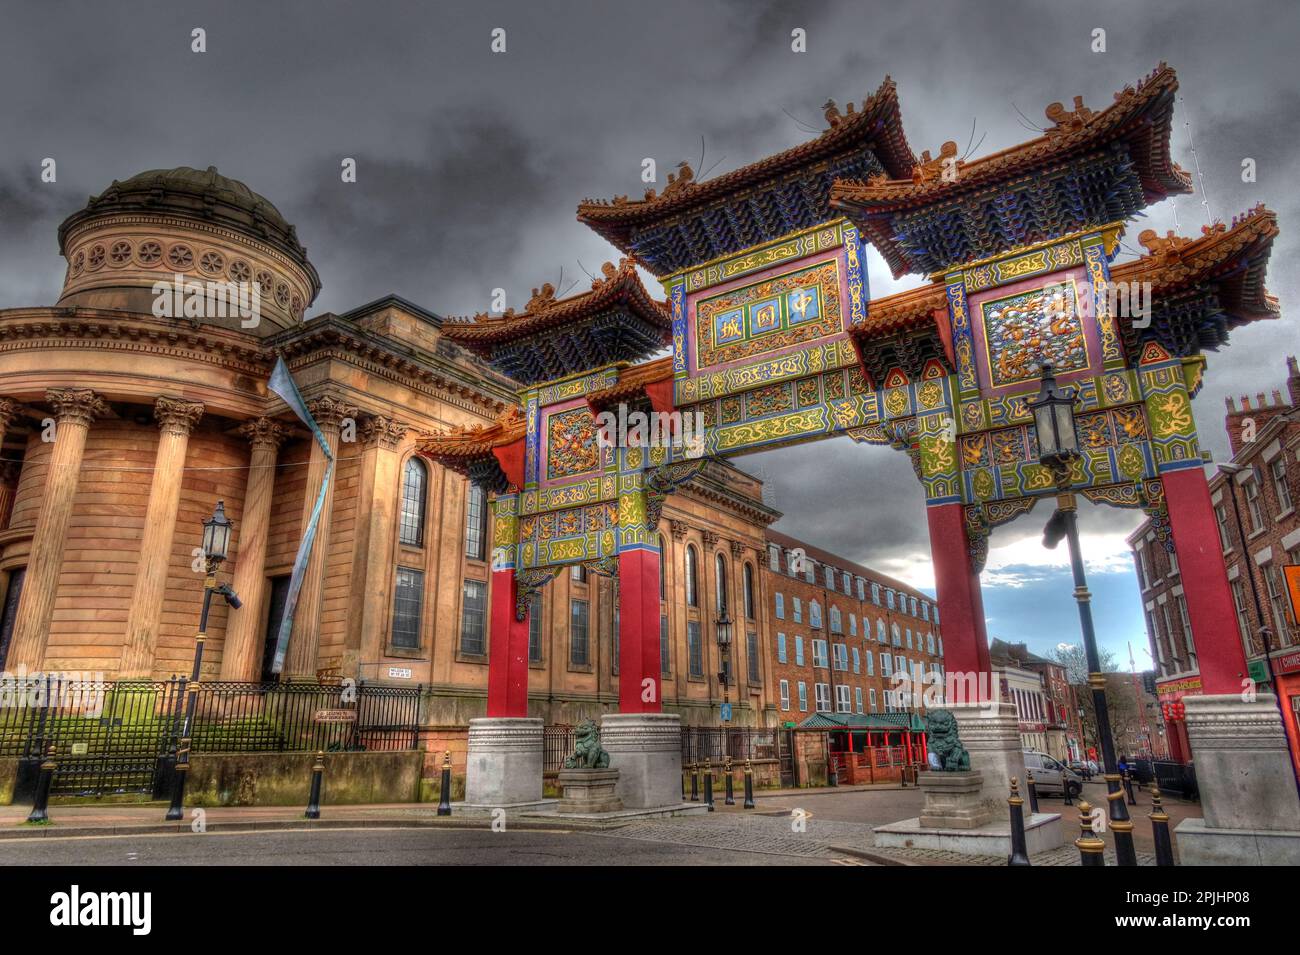 Le Paifang Chinatown Gate, Nelson Street, Liverpool, Merseyside, Angleterre, ROYAUME-UNI, L1 5DN Banque D'Images